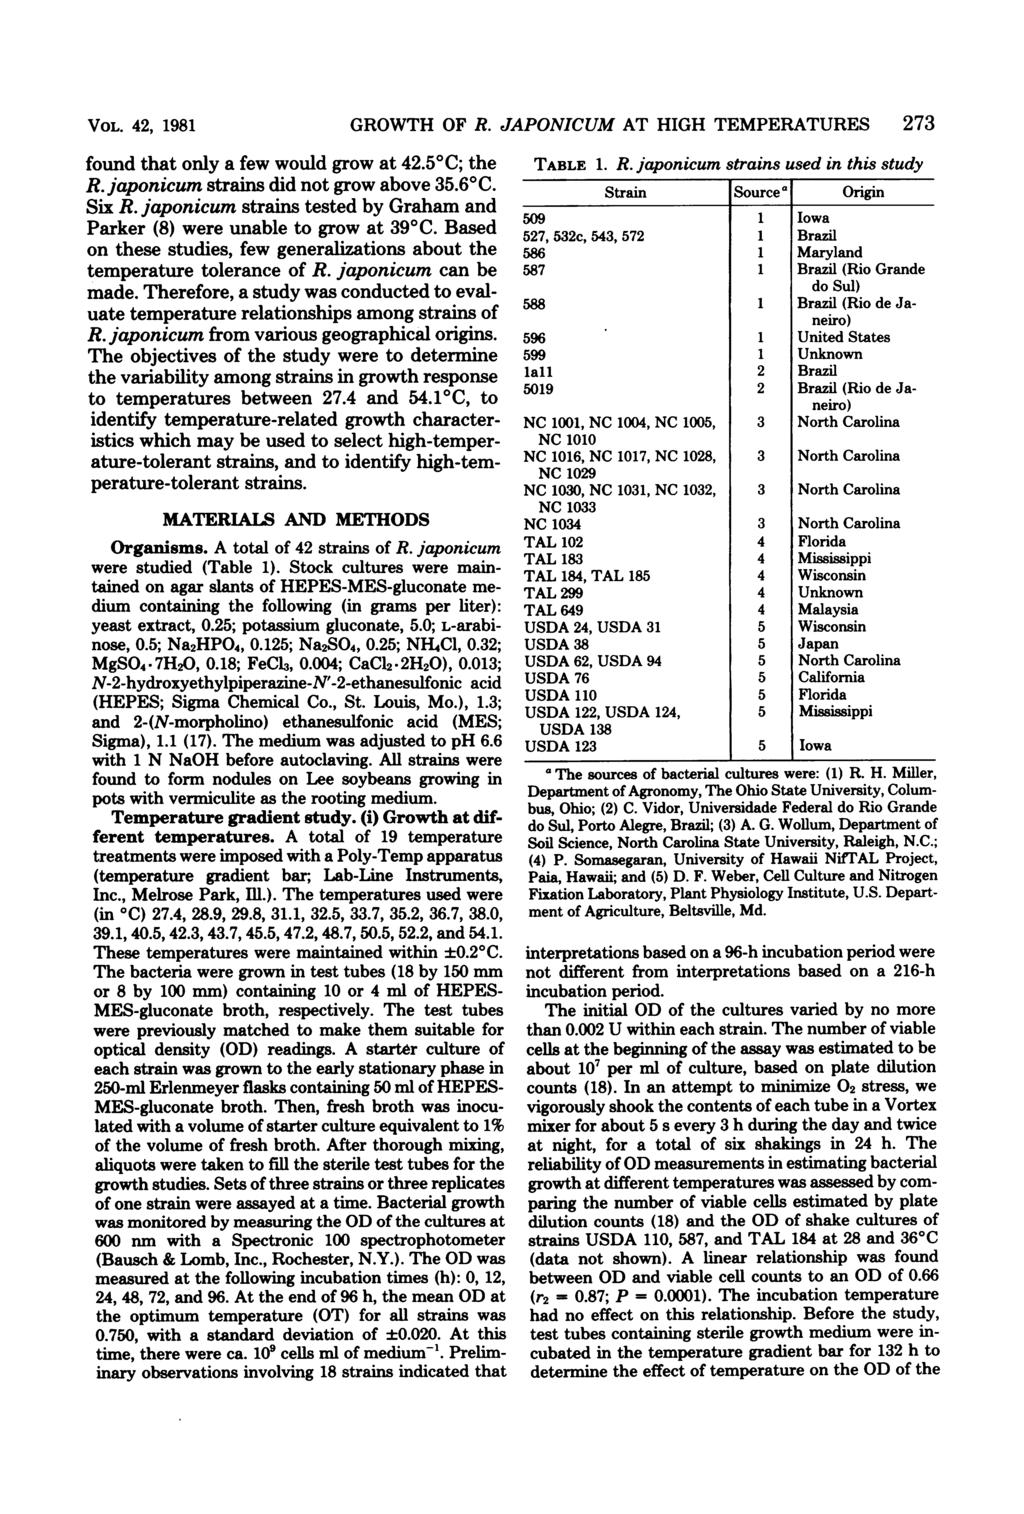 VOL. 42, 1981 found that only a few would grow at 42.50C; the R. japonicum strains did not grow above 35.60C. Six R. japonicum strains tested by Graham and Parker (8) were unable to grow at 390C.